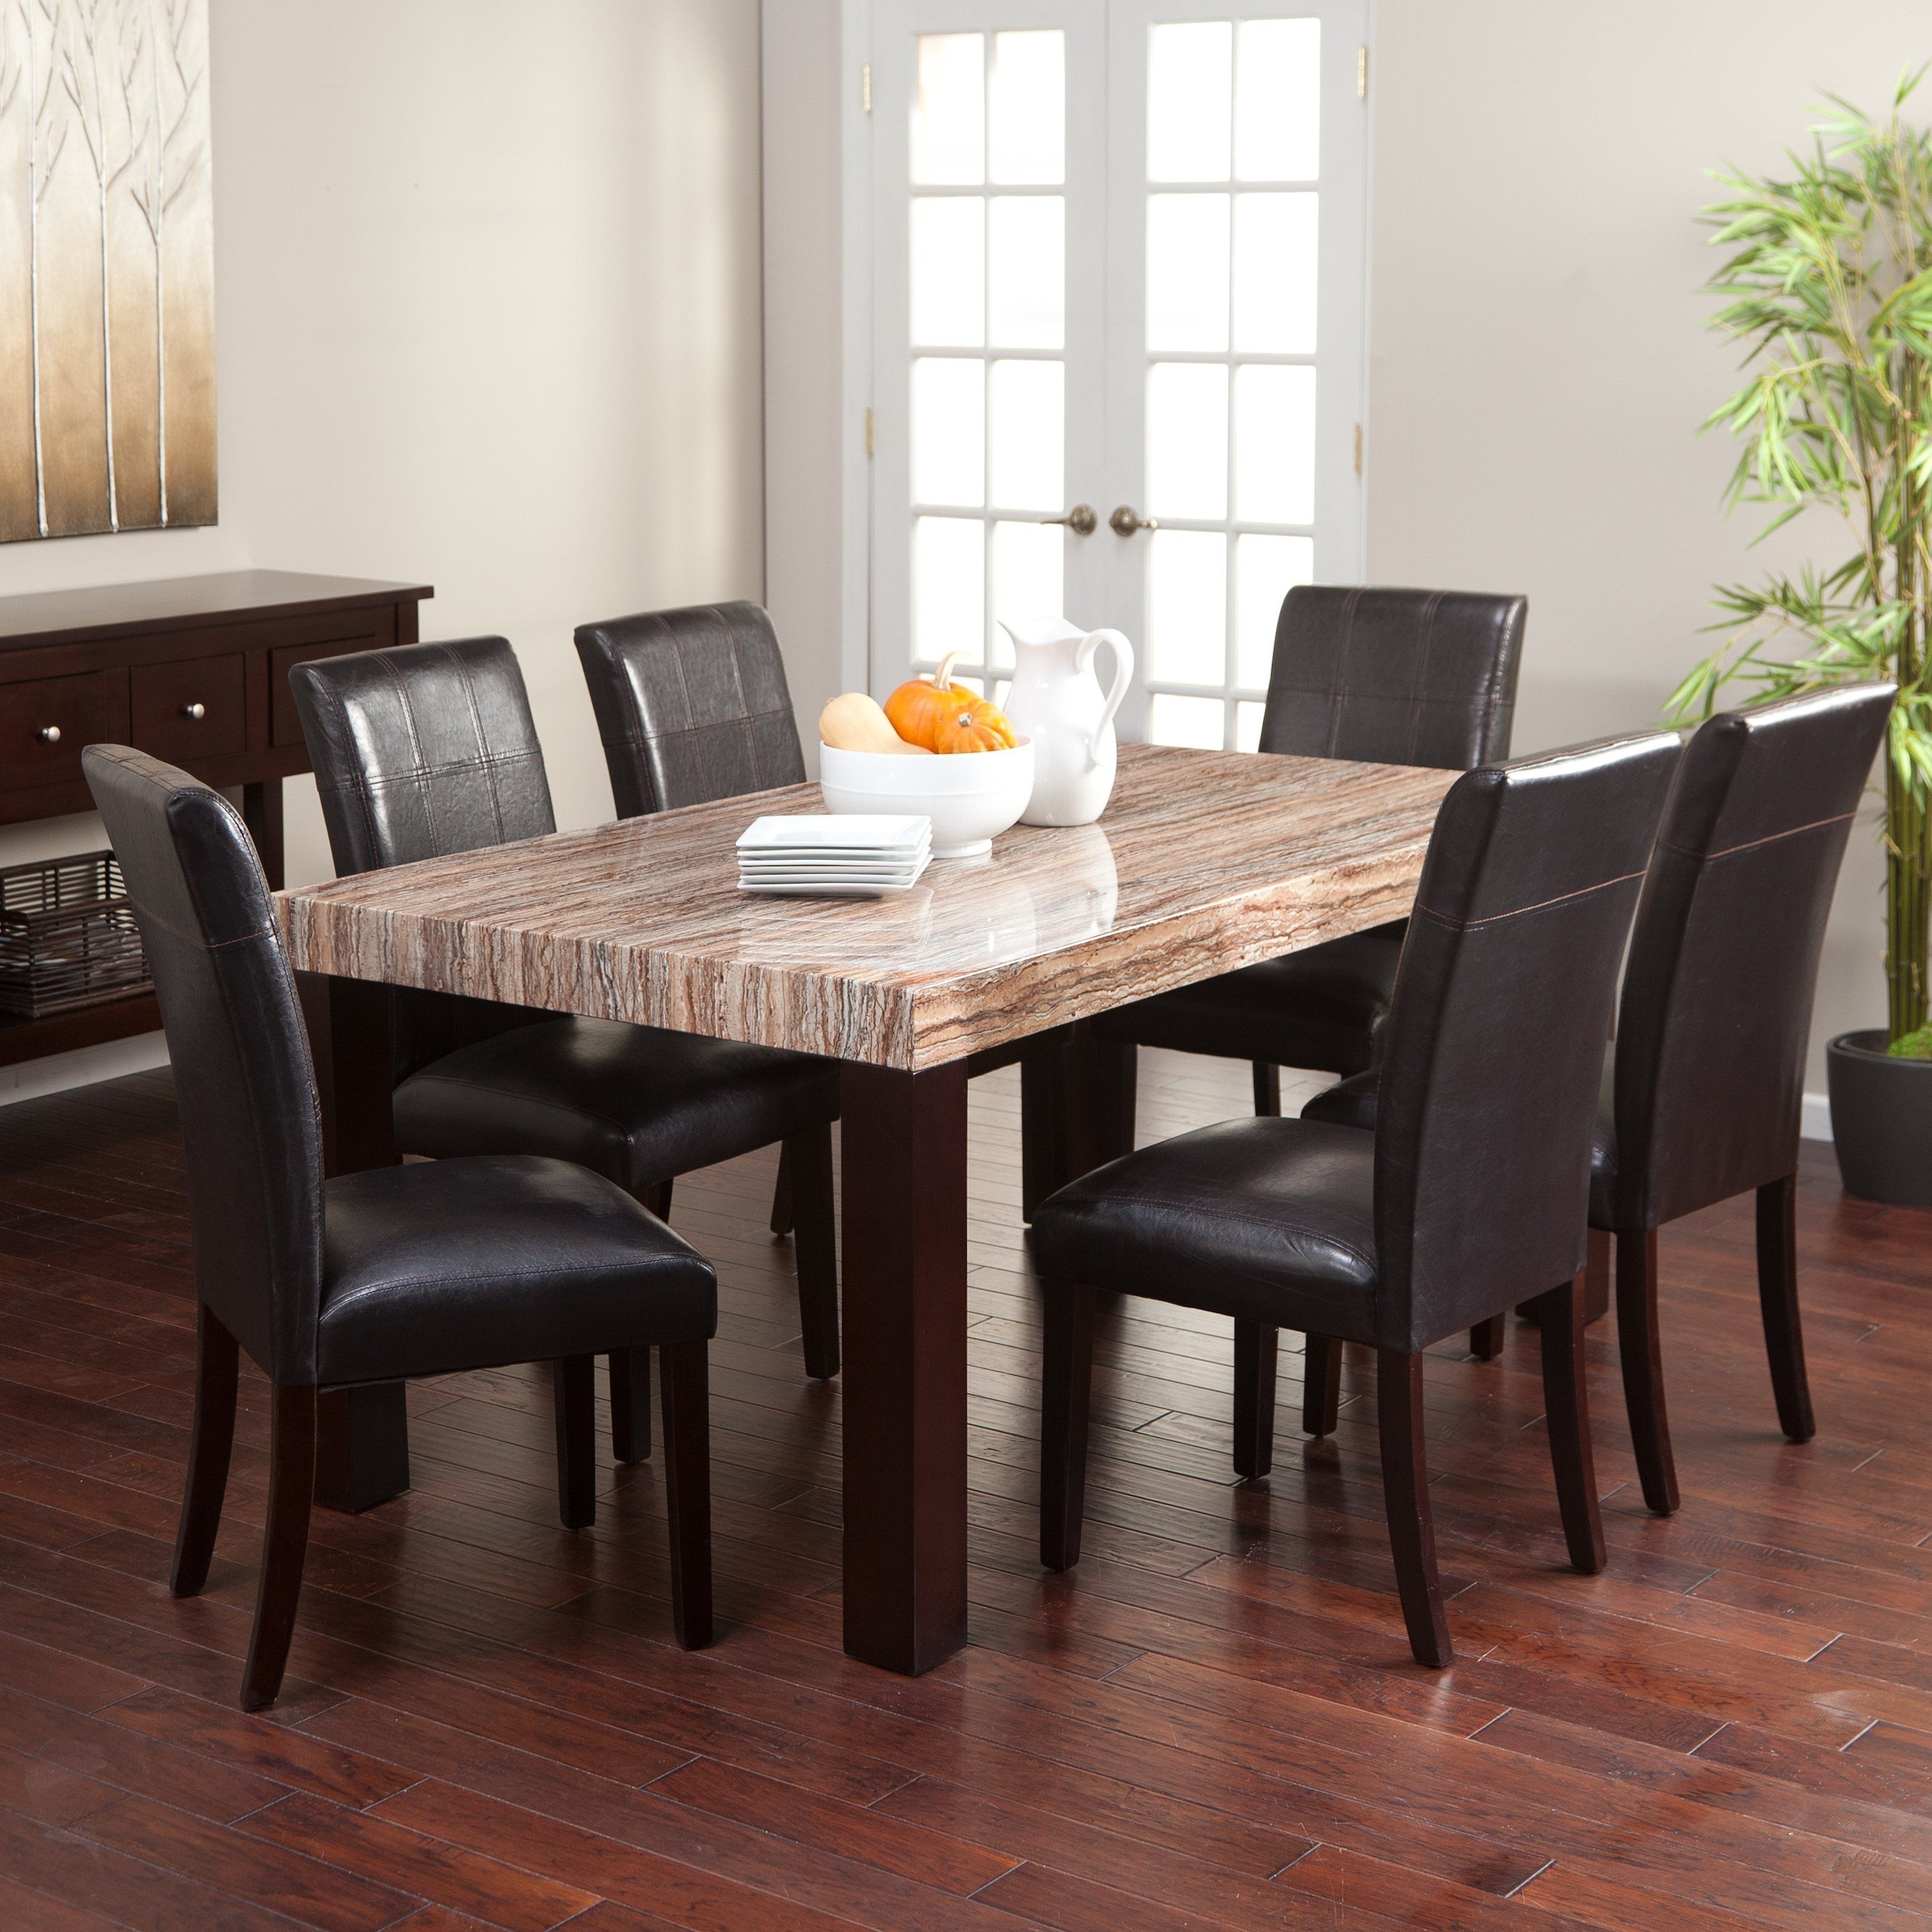 Carmine 7 Piece Dining Table Set – With Its Creamy Caramel Colored With Regard To 2018 Parquet 7 Piece Dining Sets (View 6 of 20)